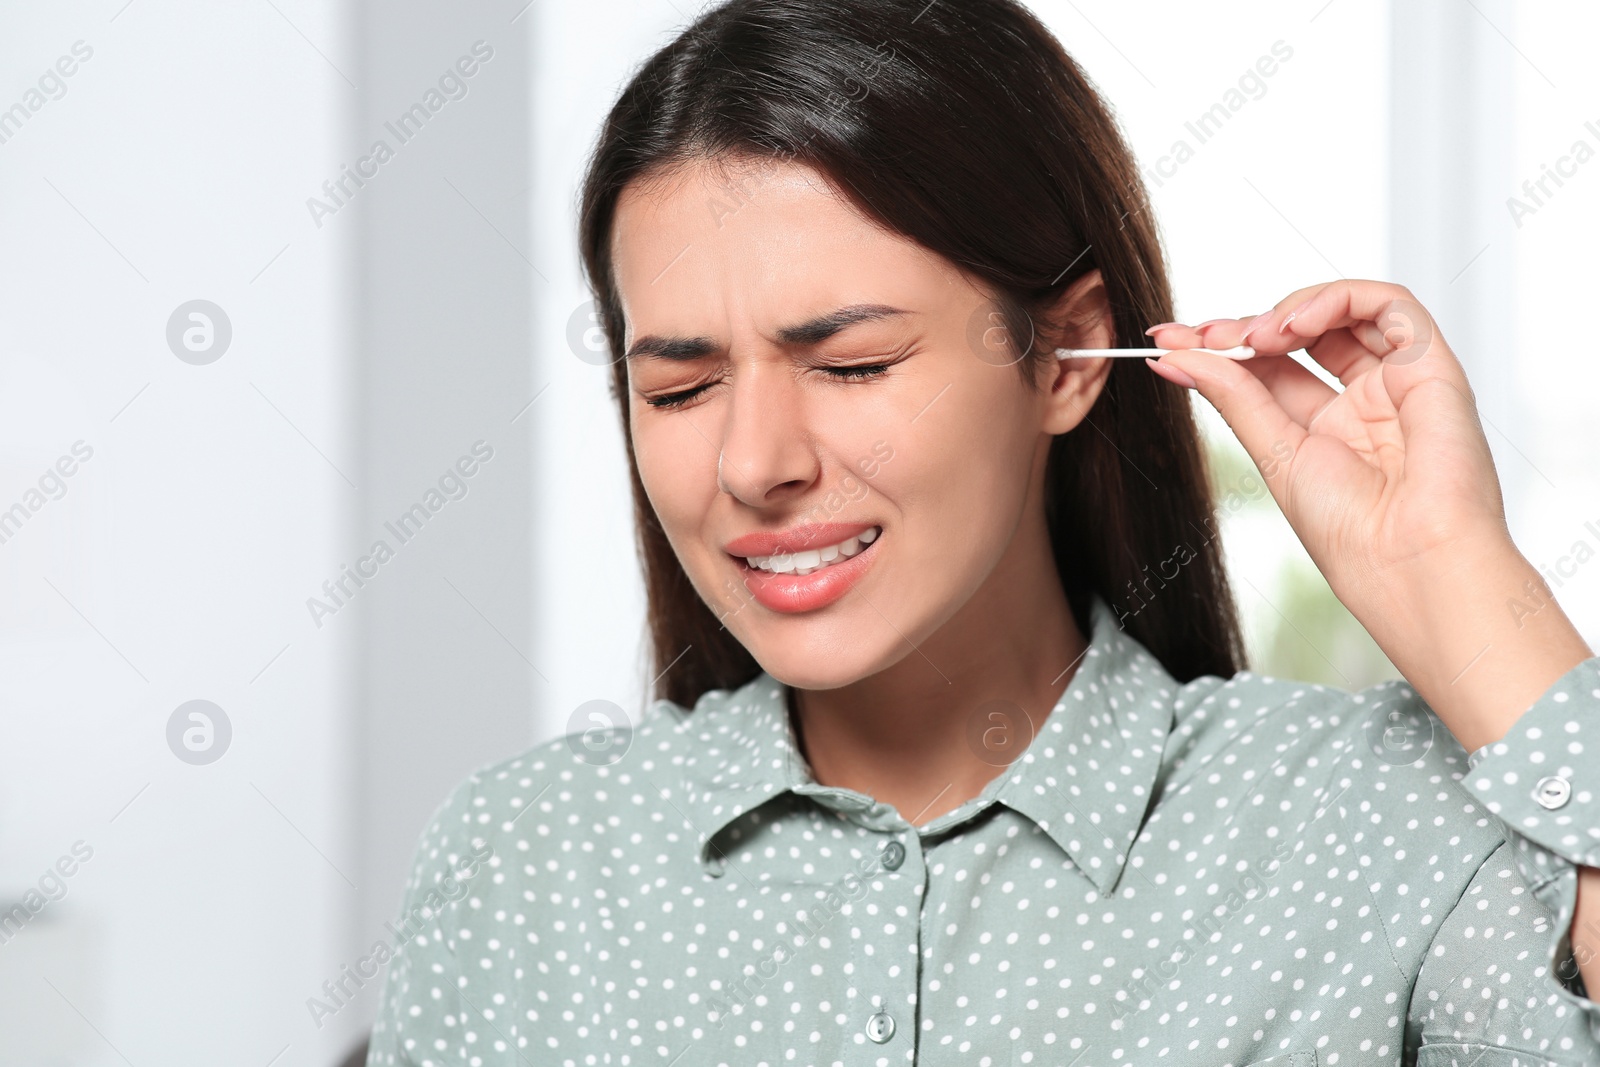 Photo of Young woman cleaning ear with cotton swab indoors